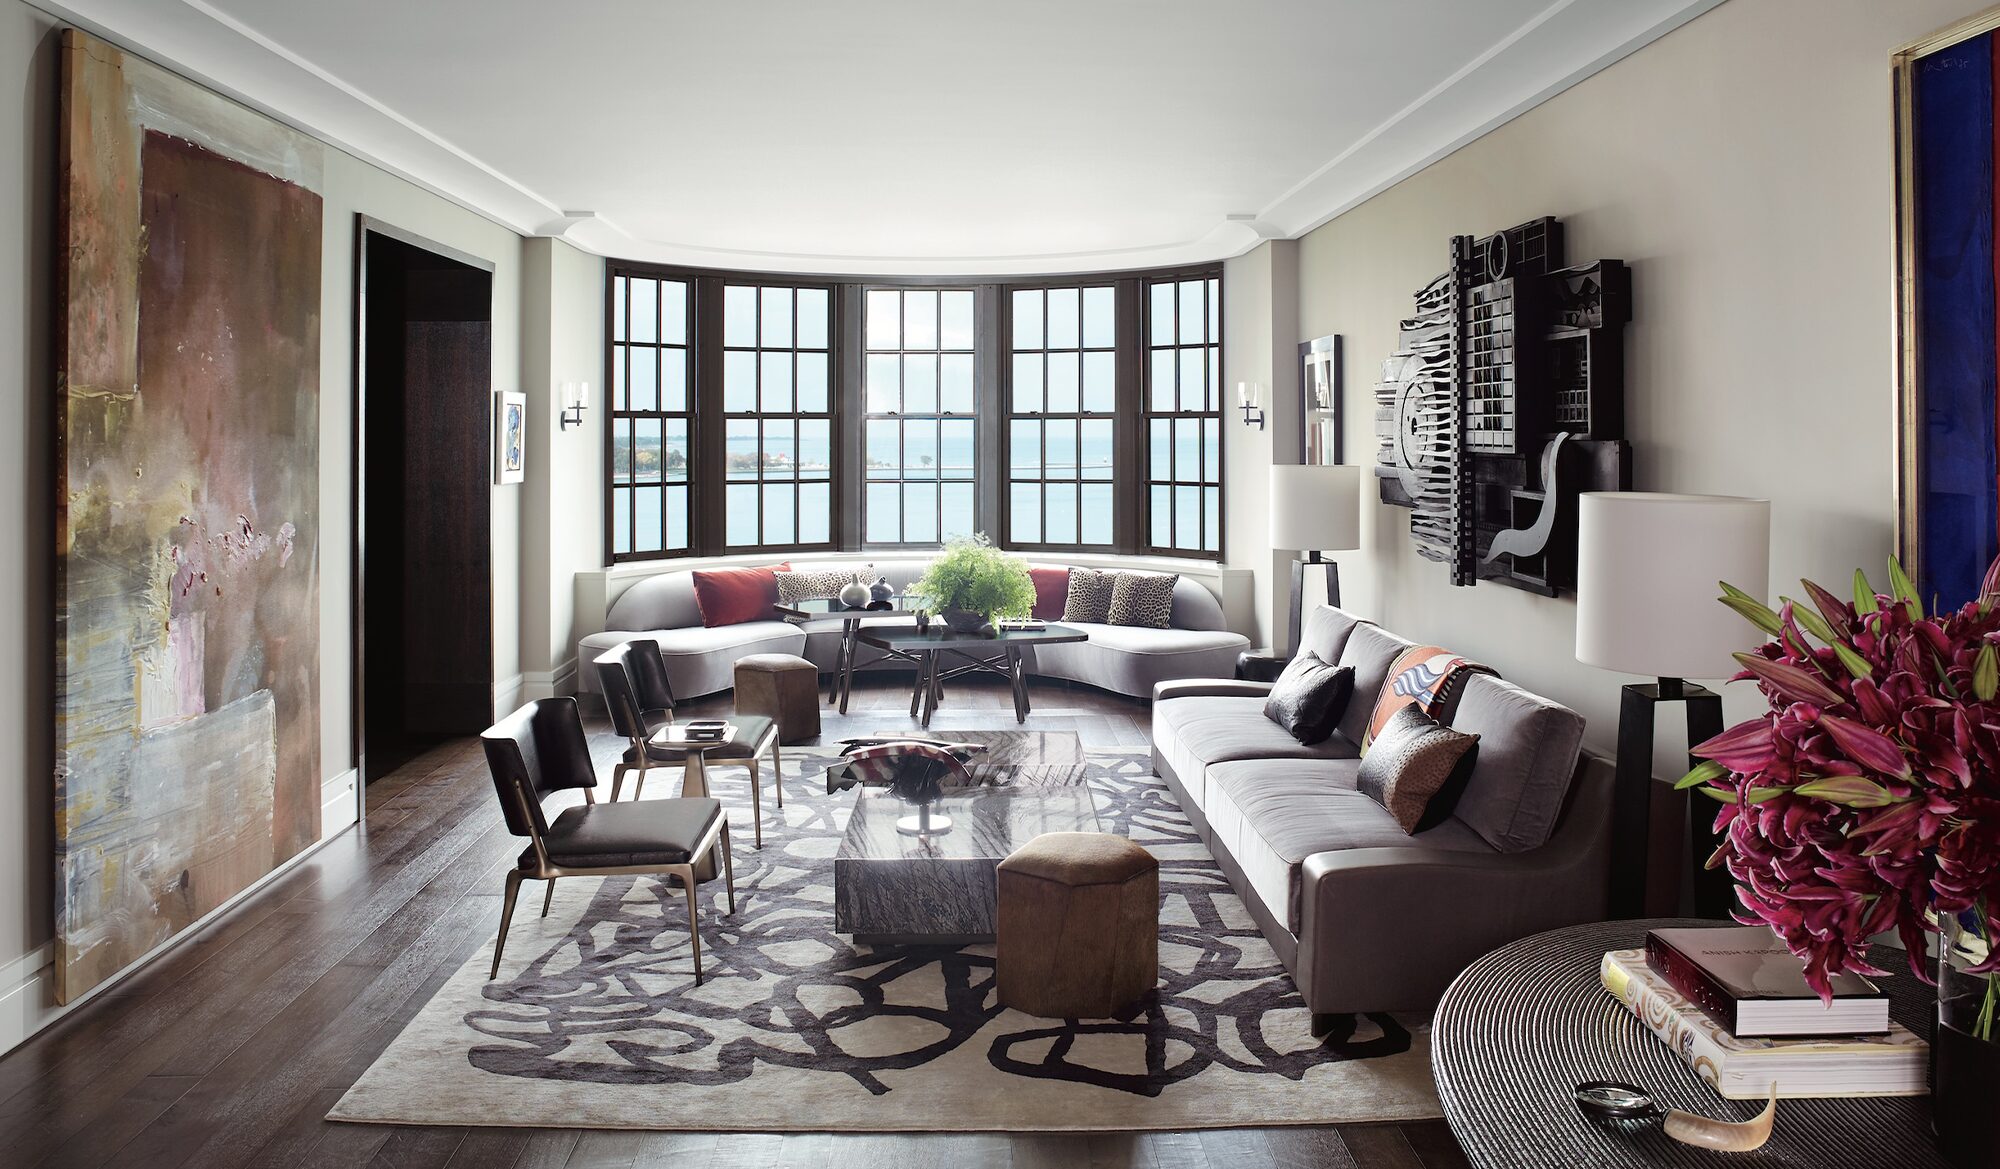 House-of-Hunt-Interior-Design-Chicago-Living-Room-With-Large-Wall-Art